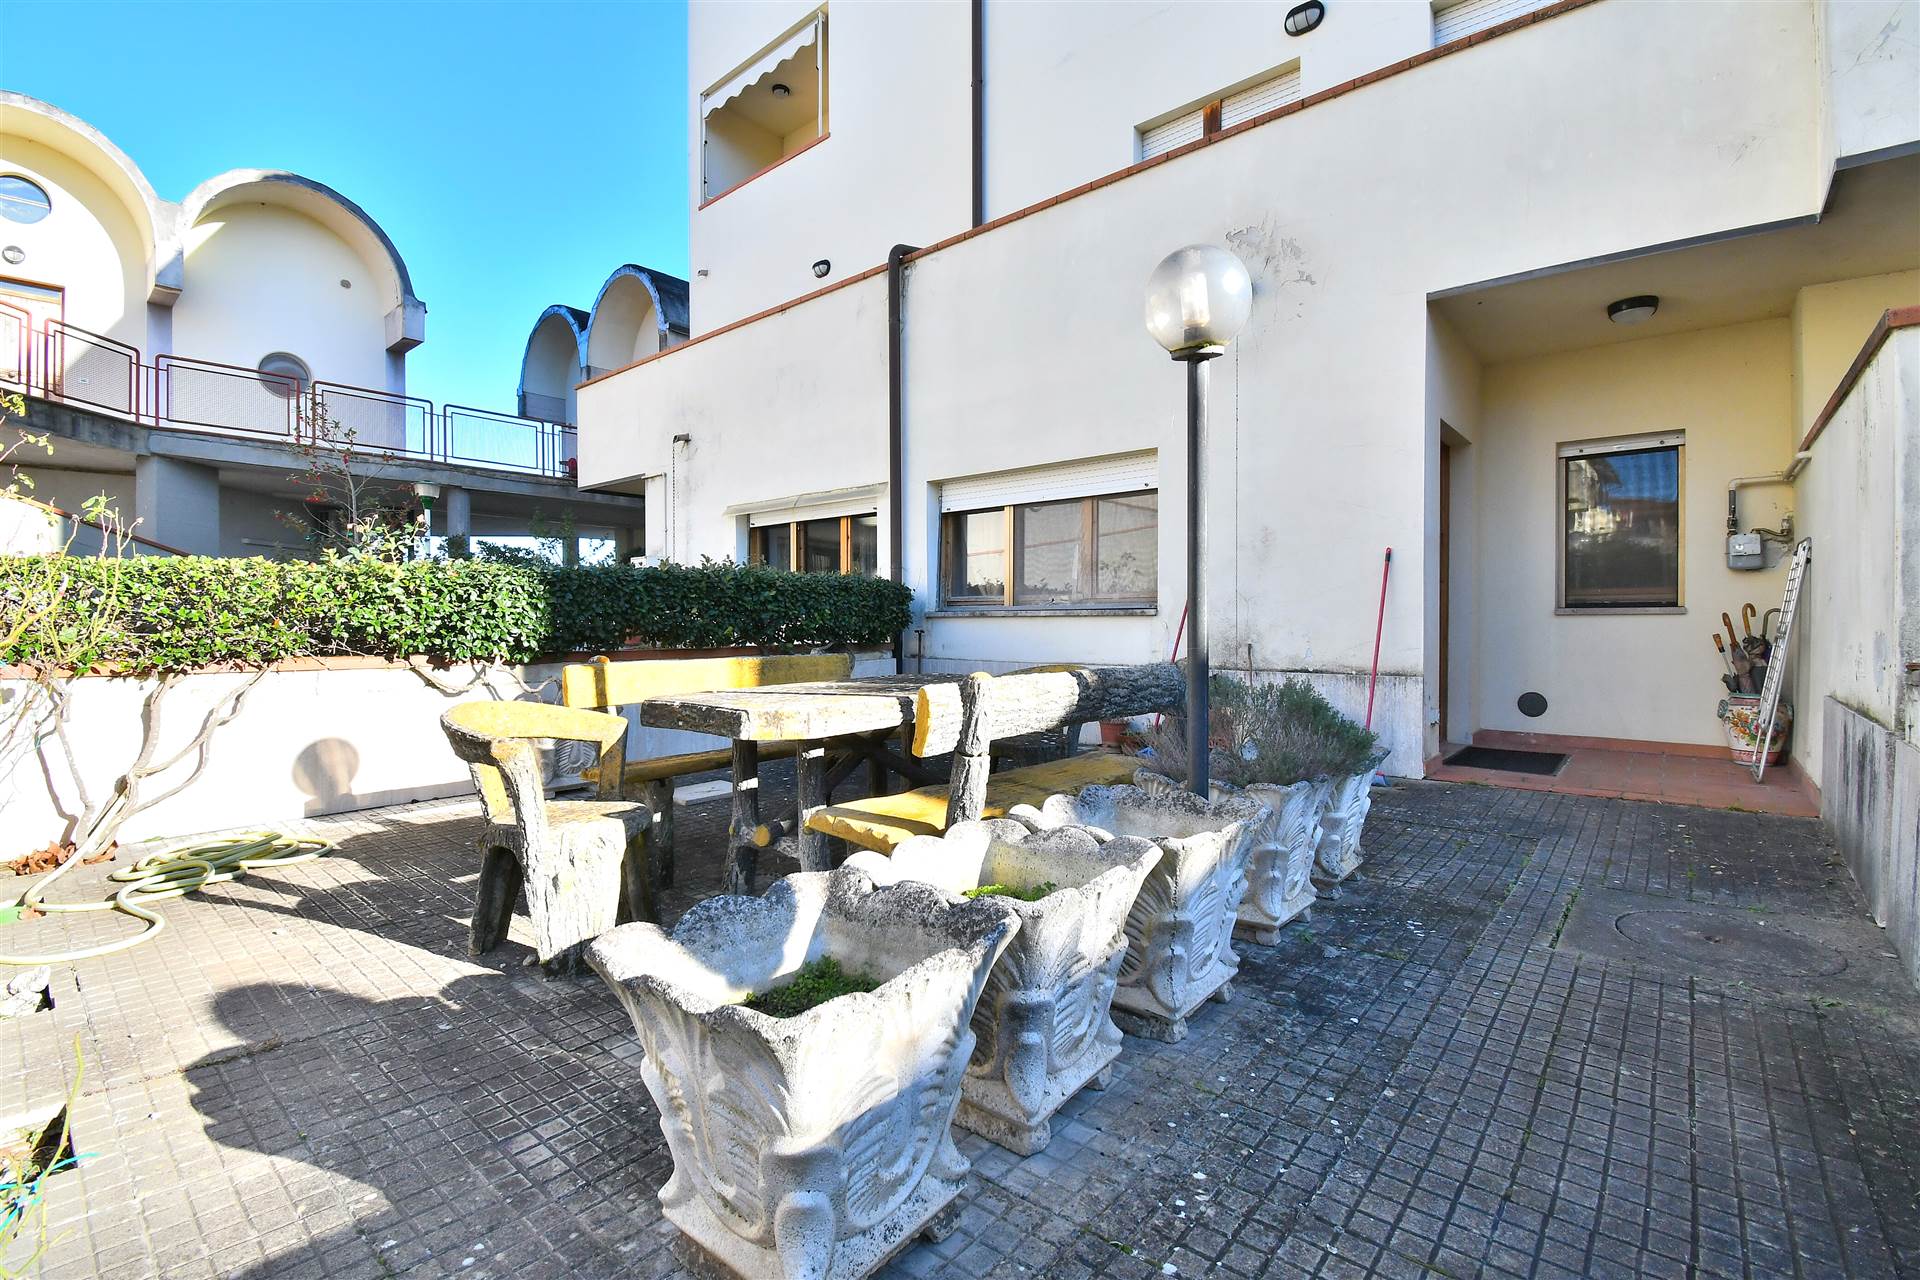 PONTE A TRESSA, MONTERONI D'ARBIA, Apartment for sale of 115 Sq. mt., Habitable, Heating Individual heating system, Energetic class: D, Epi: 71,95 kwh/m2 year, placed at Ground on 2, composed by: 6 